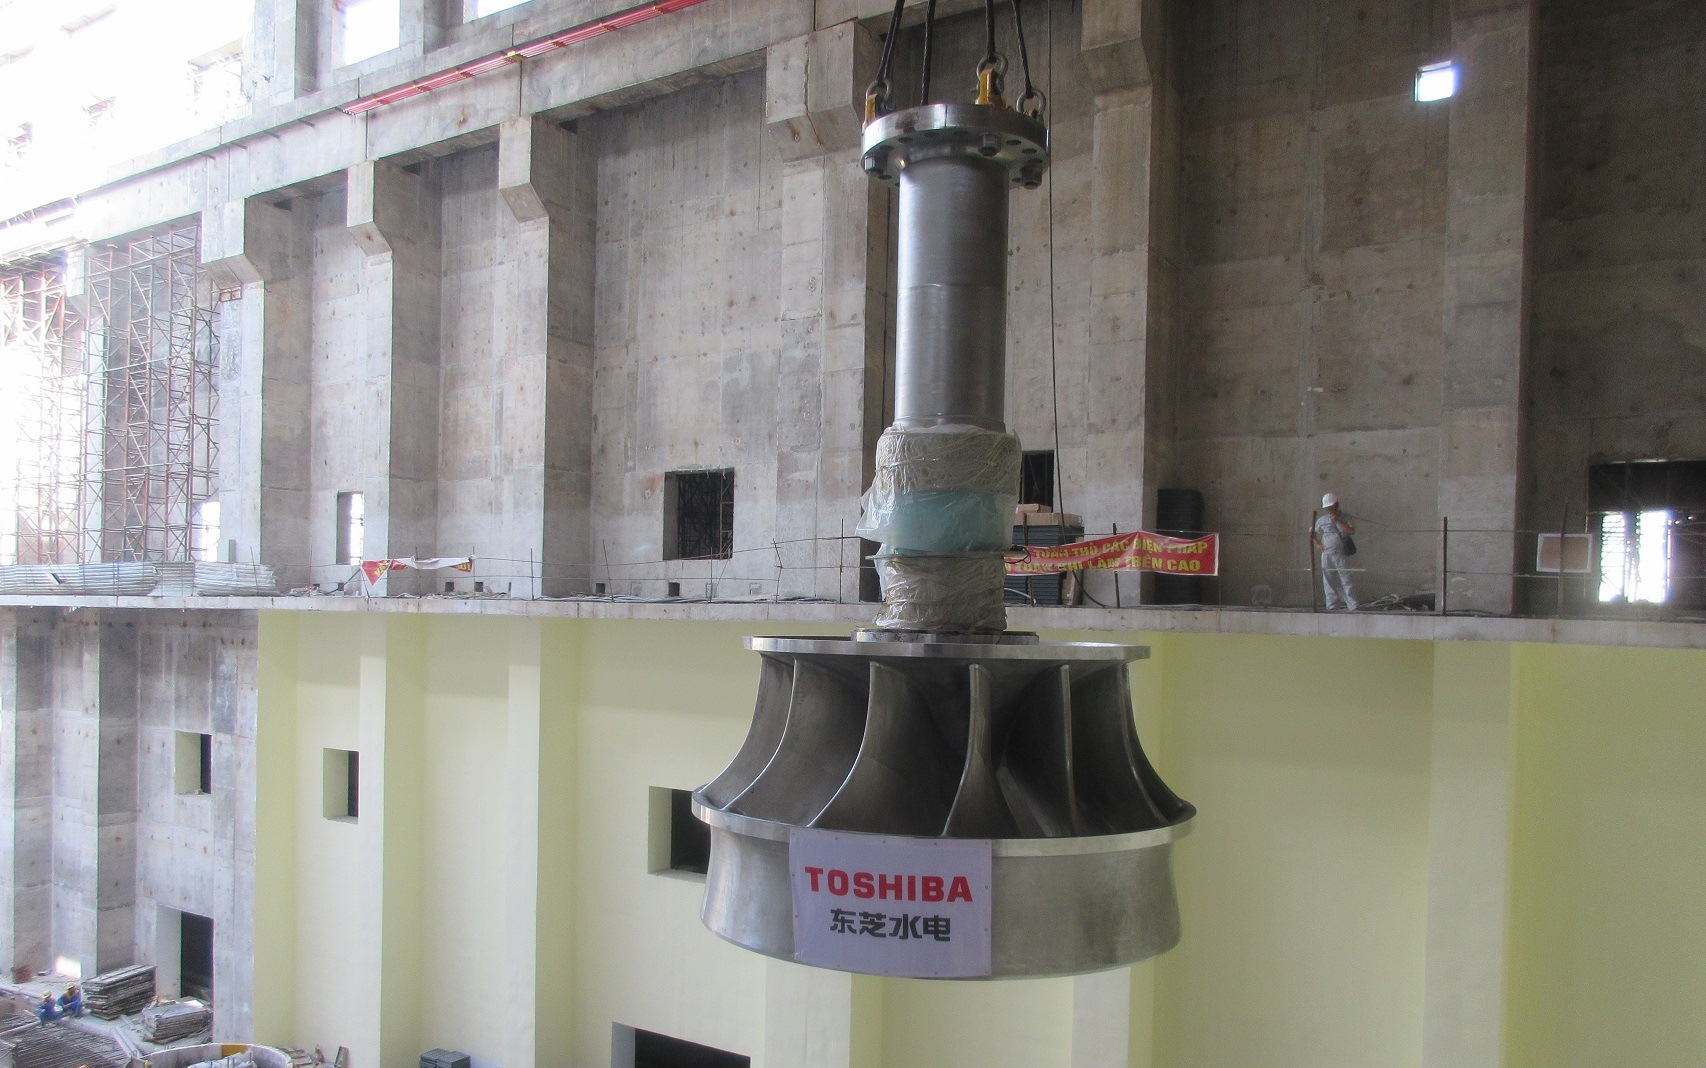 Trung Son Hydro Power Station units 1 to 4 start operation with Toshiba equipment